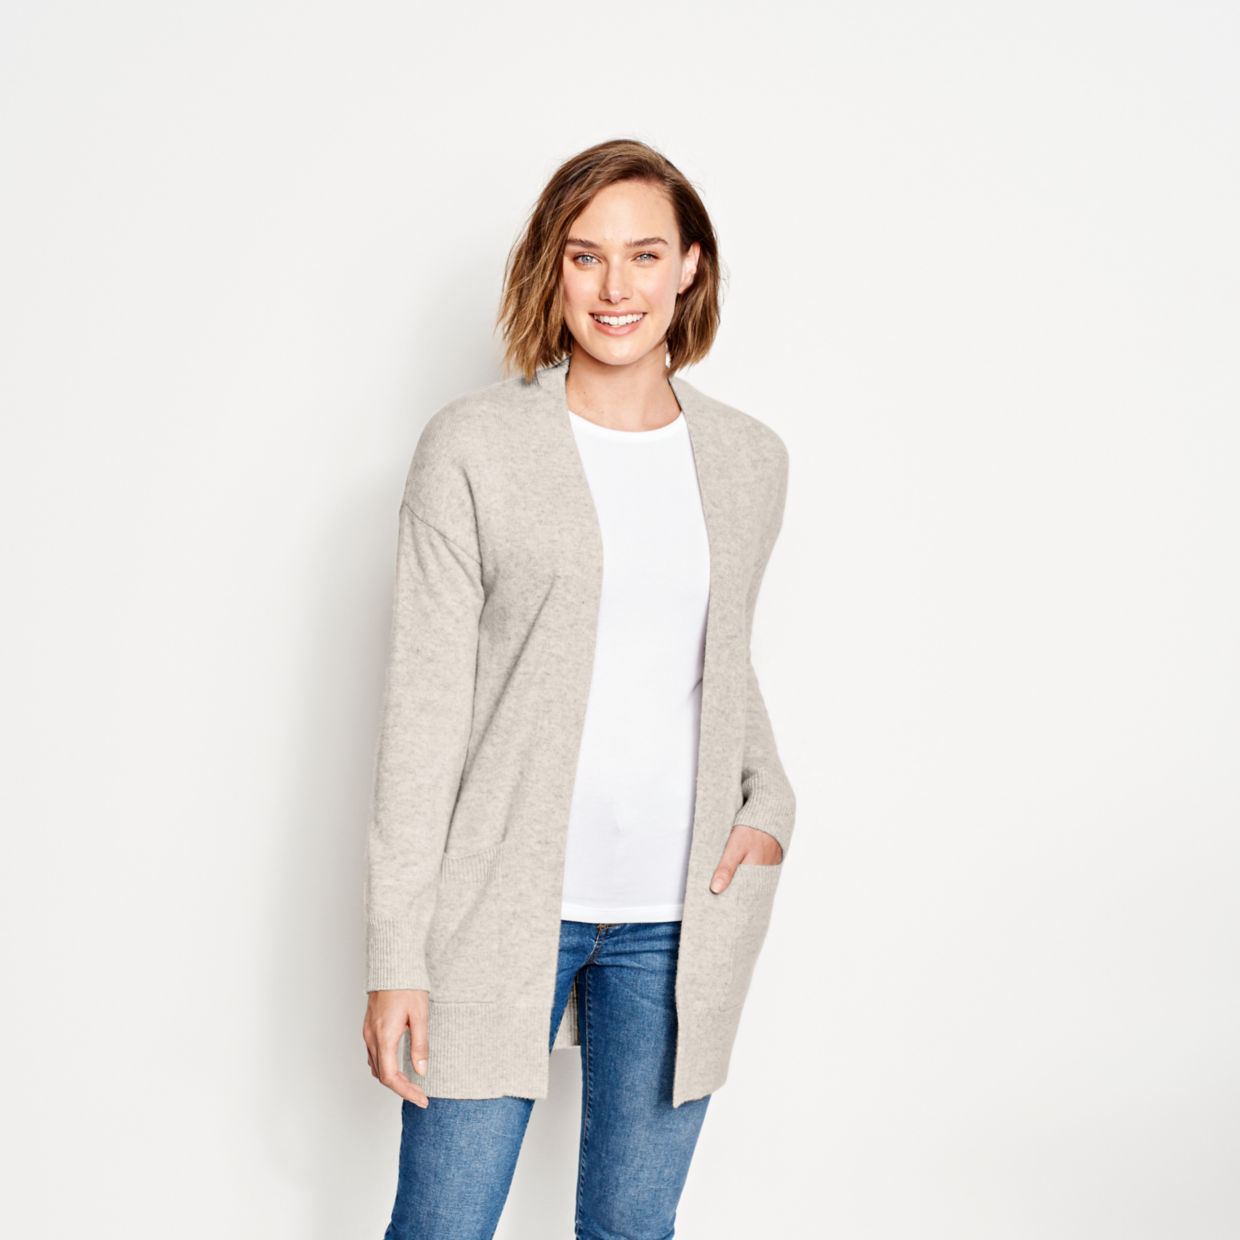 Cashmere Open Front Cardigan Sweater